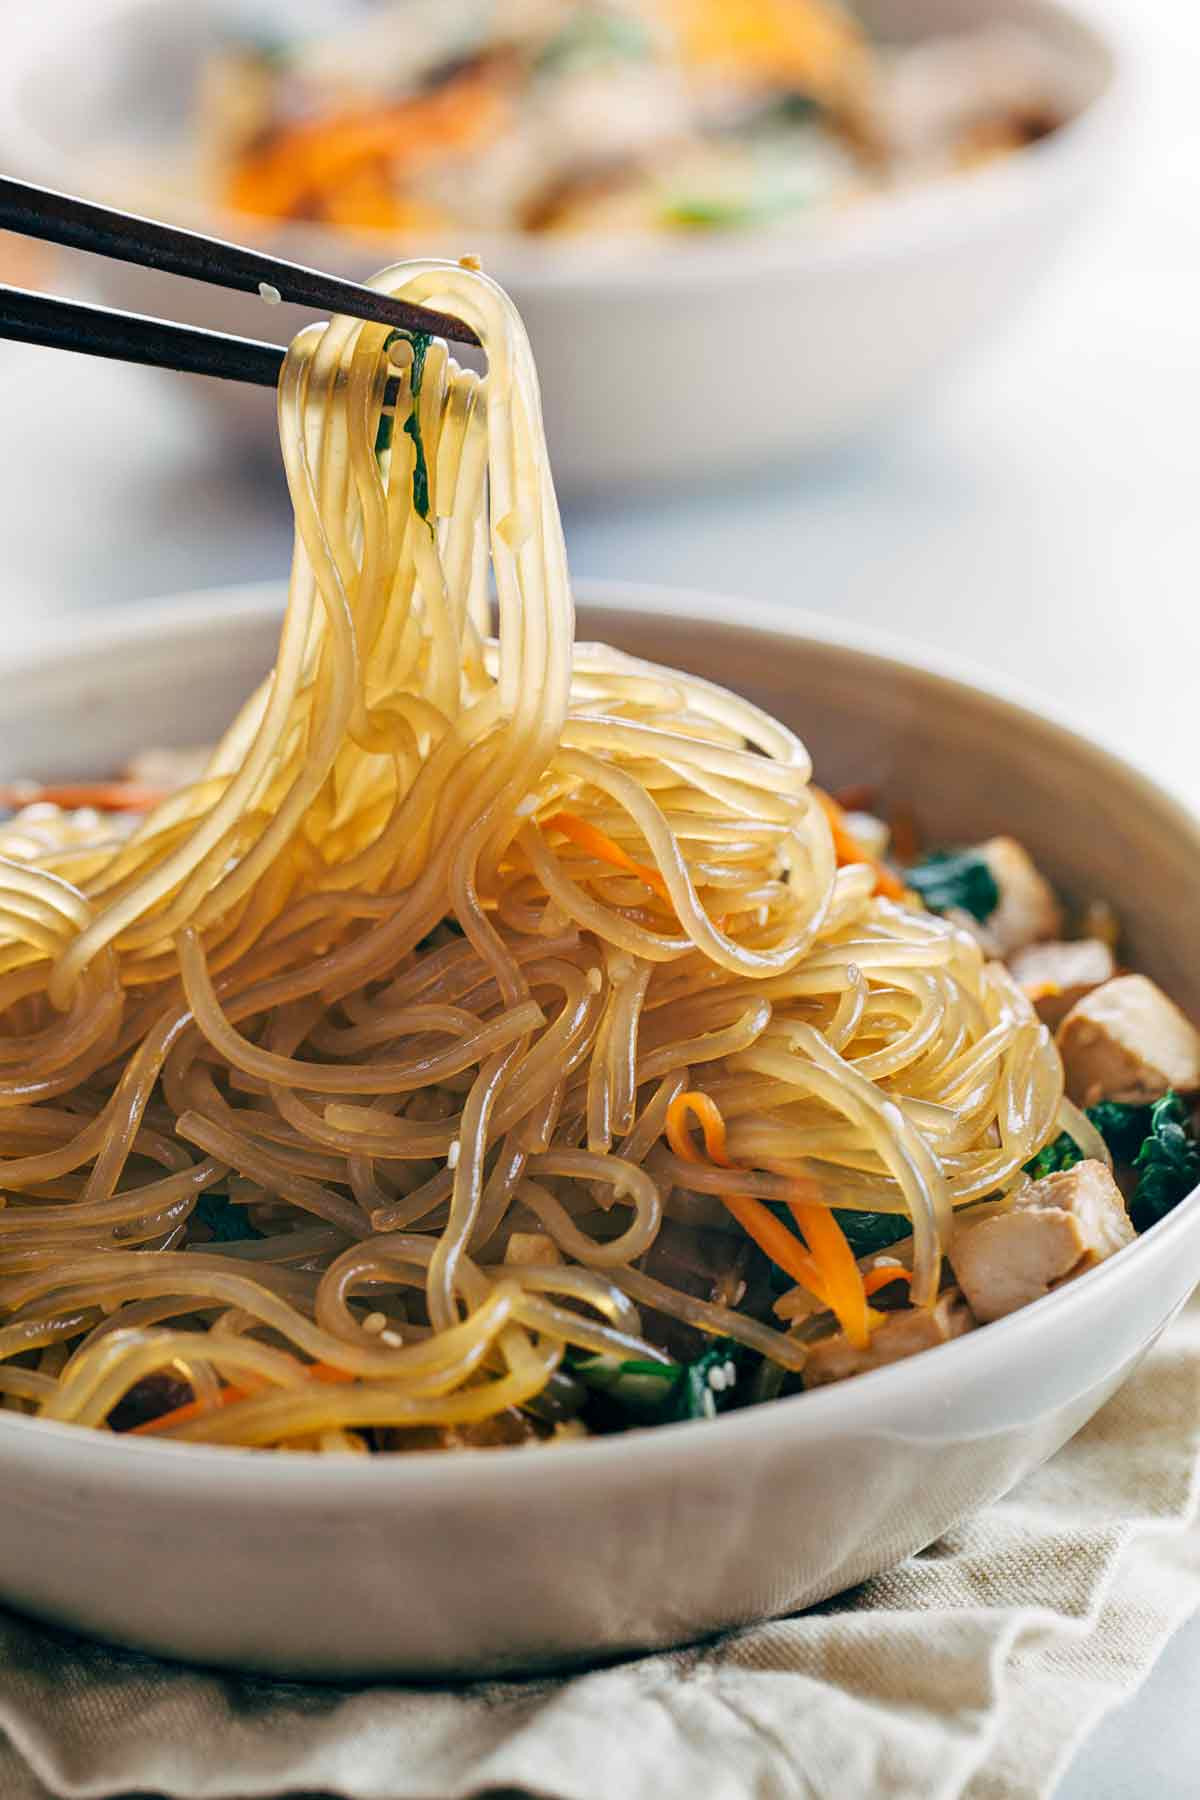 Are Glass Noodles Healthy 20 Best Ideas Ve Arian Japchae Korean Glass Noodles with tofu